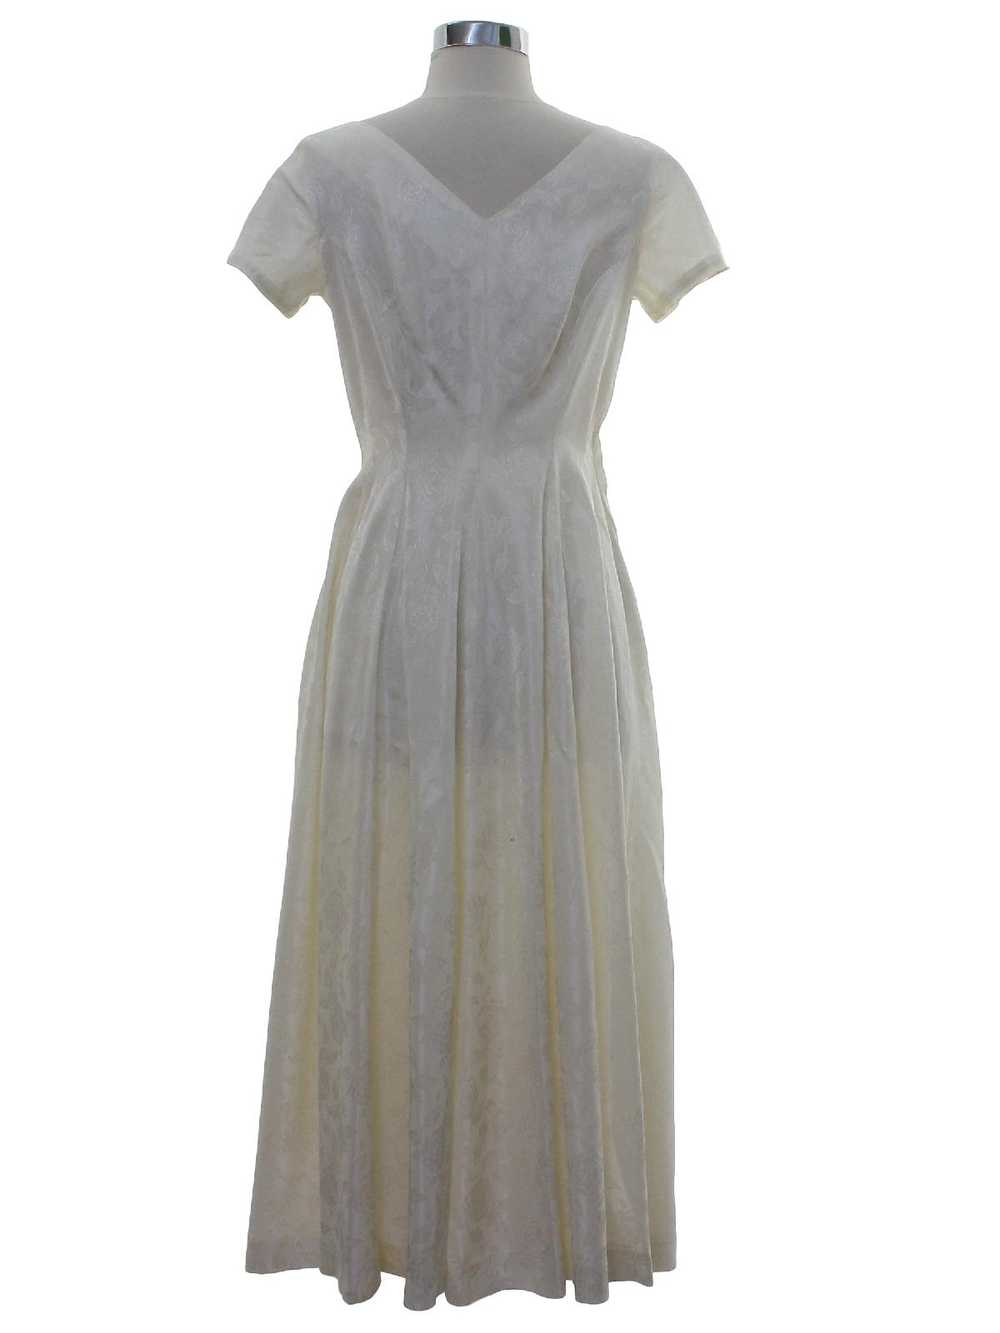 1980's Wedding or Cocktail Dress - image 3